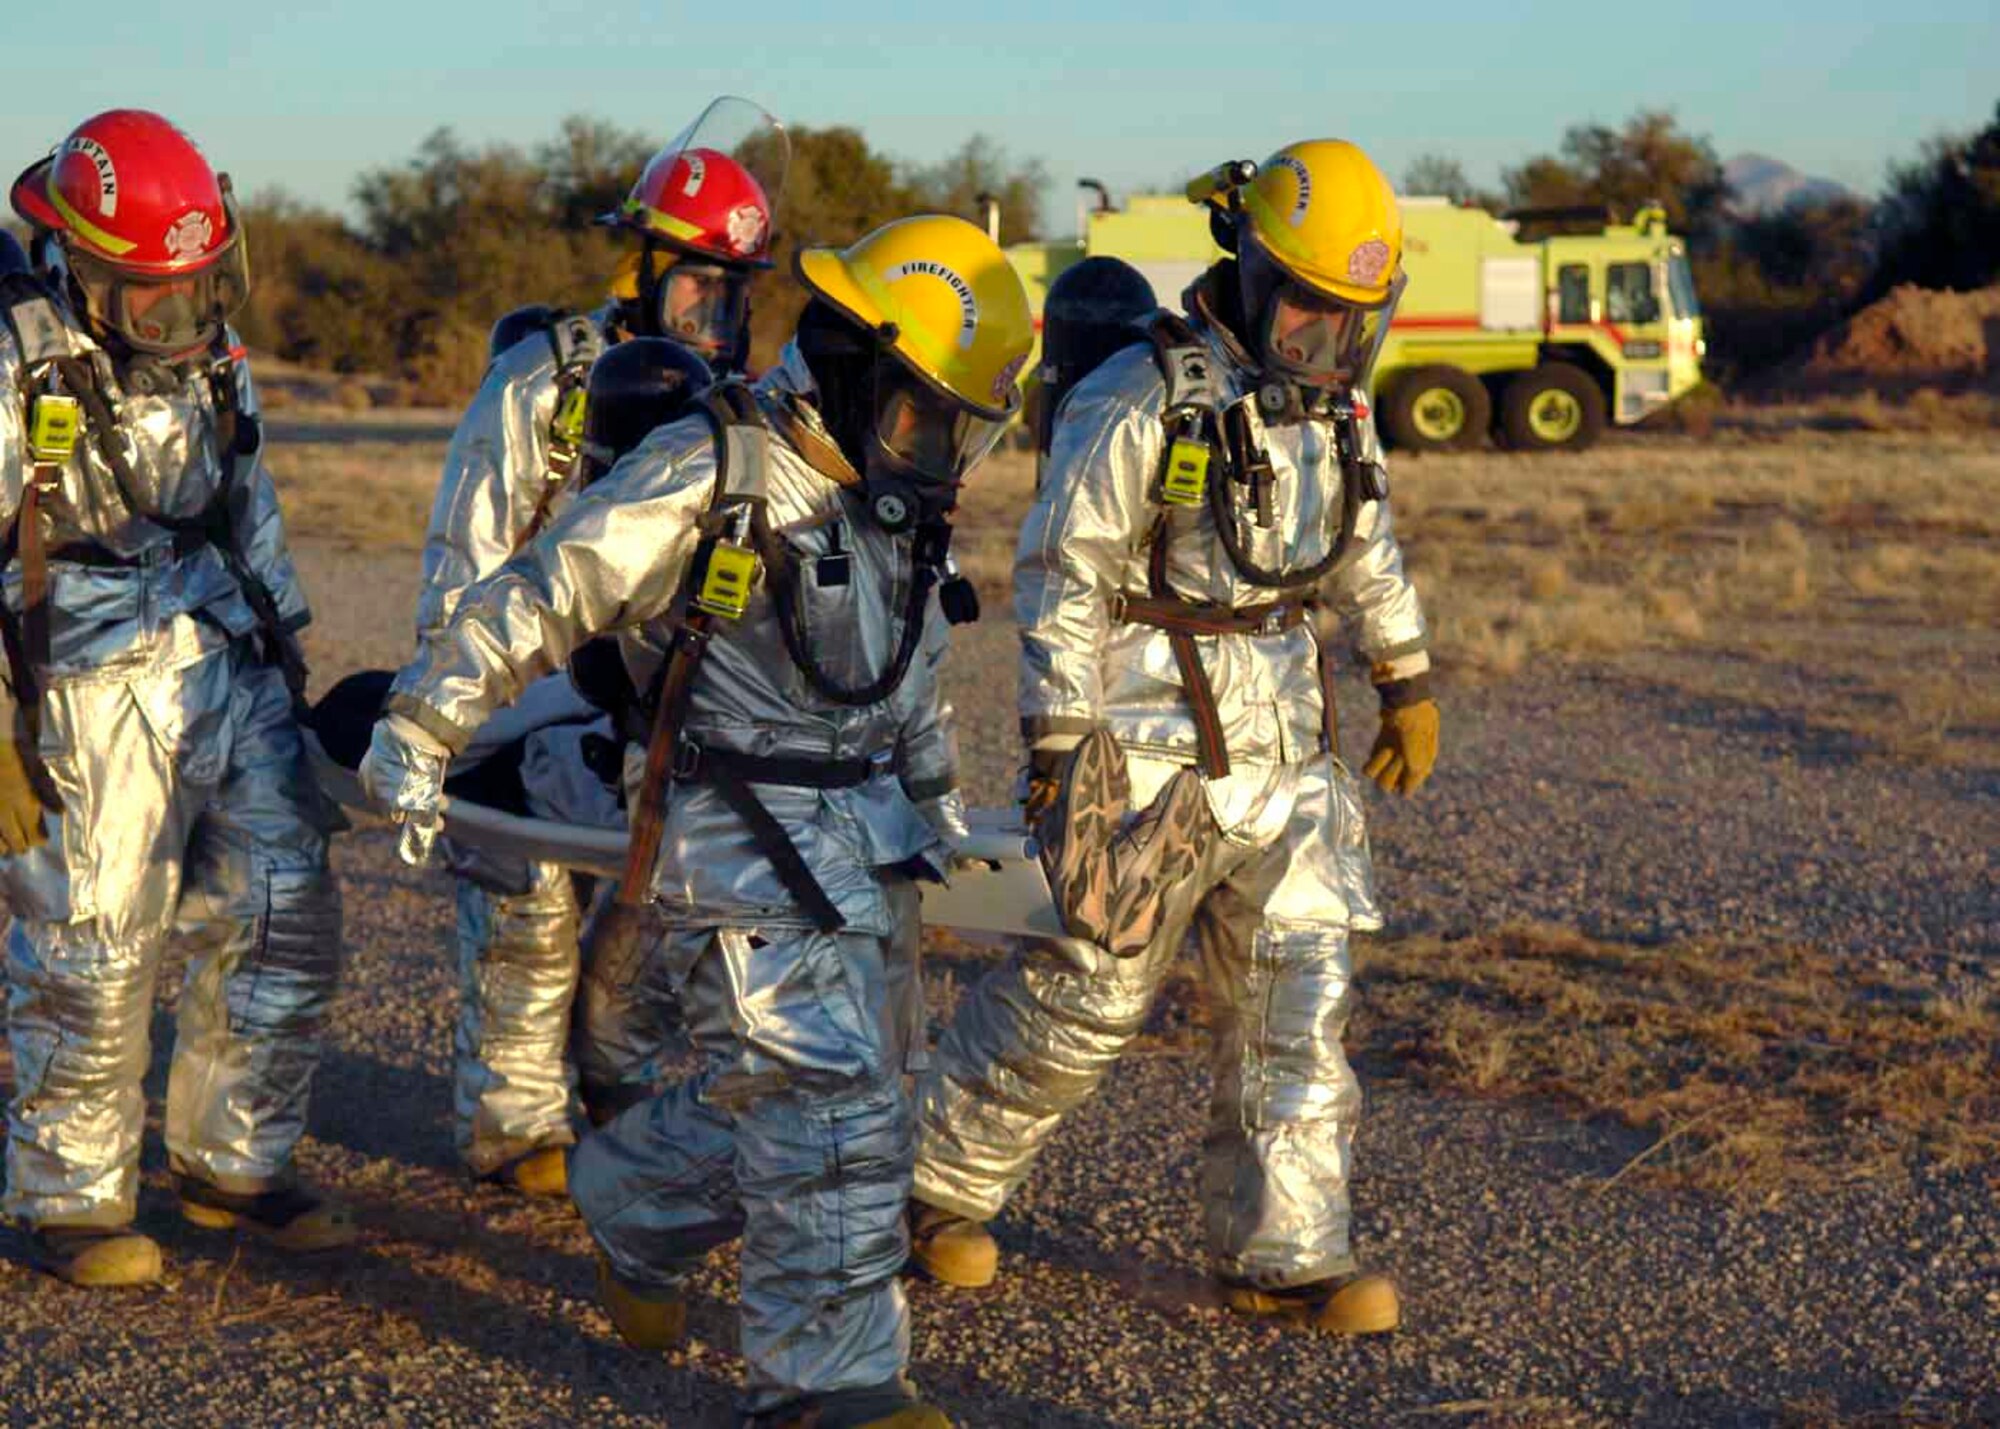 Davis-Monthan Air Force Base firefighters carry a survivor from a simulated aircraft accident to an ambulance for transportation to a local hospital Dec. 4 at Davis-Monthan AFB, Ariz. Exercise Vigilant Shield 07 is a joint Department of Defense and federal nuclear weapon accident exercise. The exercise scenario involved a C-17 Globemaster III carrying four nuclear weapons to be diverted to Davis-Monthan AFB due to simulated engine failure that caused an aircraft accident. Davis-Monthan firefighters, the Tucson Fire Department, Tucson Police Department, and many different agencies ranging form local to national levels responded to the simulated scene. (U.S. Air Force photo/Senior Airman Christina D. Ponte)